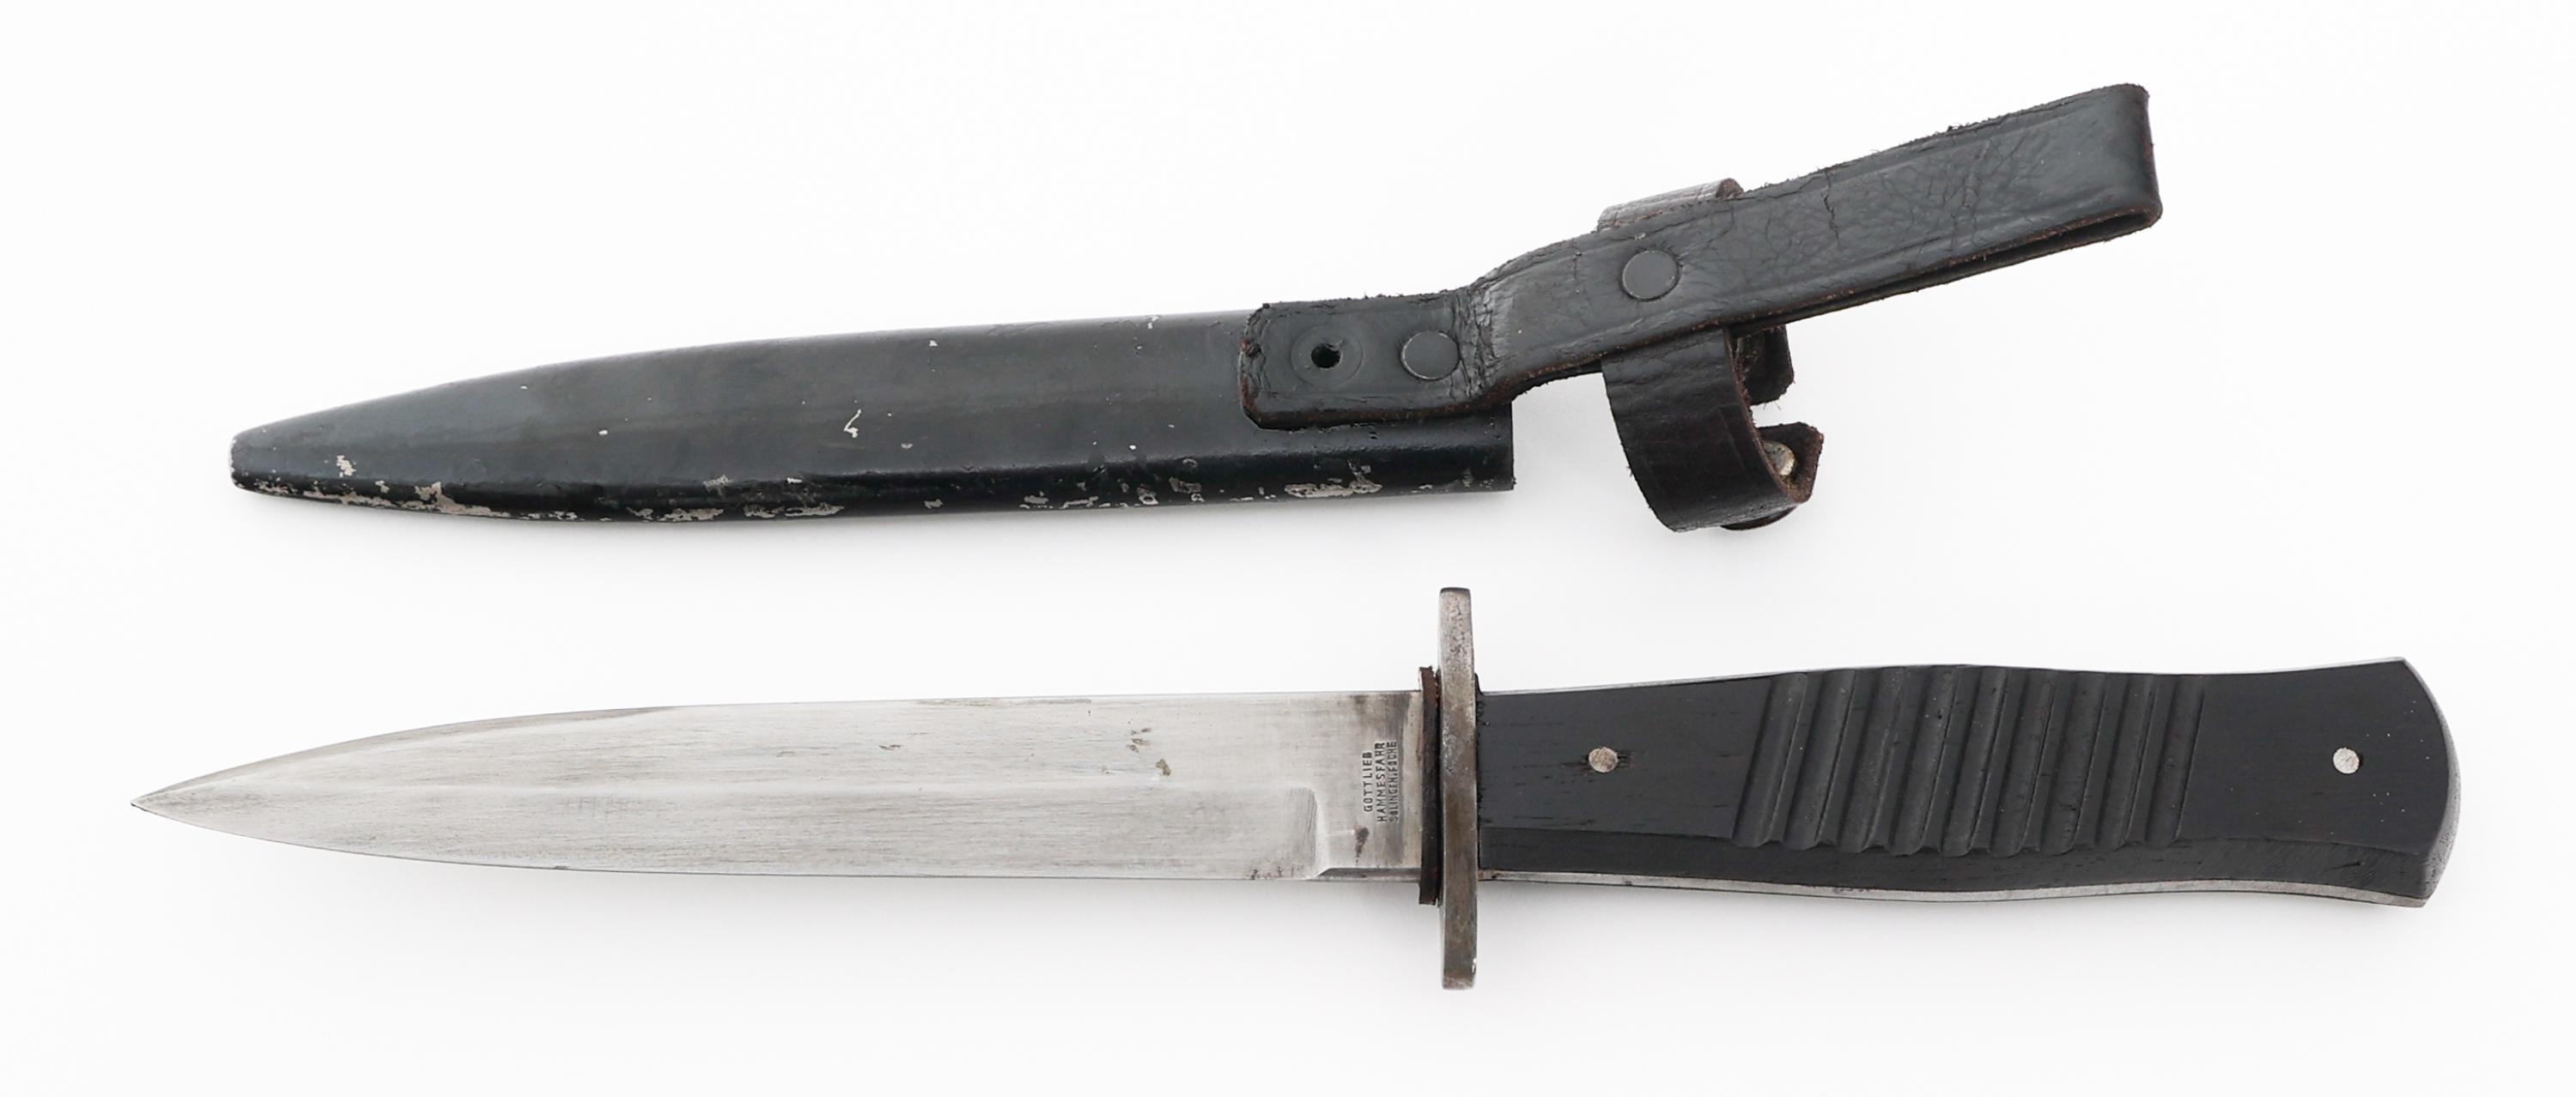 WWI IMPERIAL GERMAN BOOT KNIFE by G. HAMMESFAHR